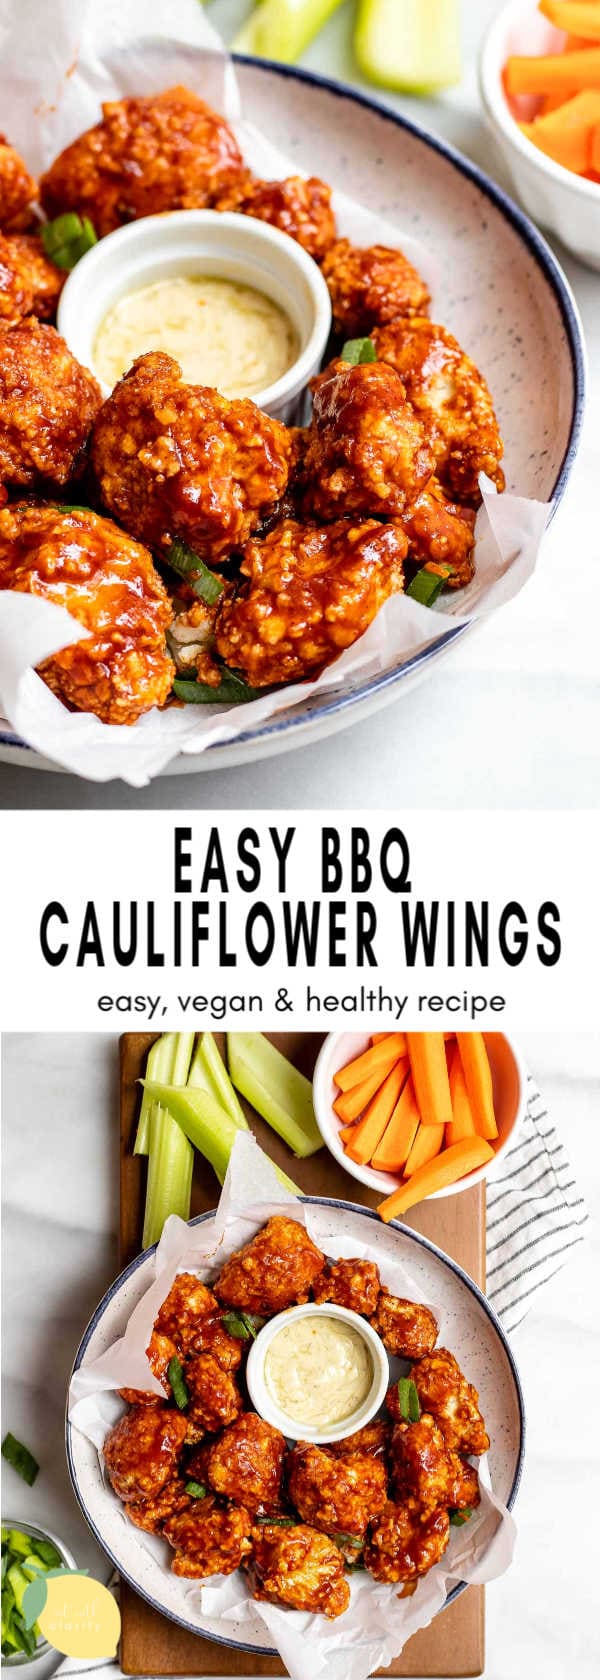 Baked BBQ Cauliflower Wings | Eat With Clarity Small Bites